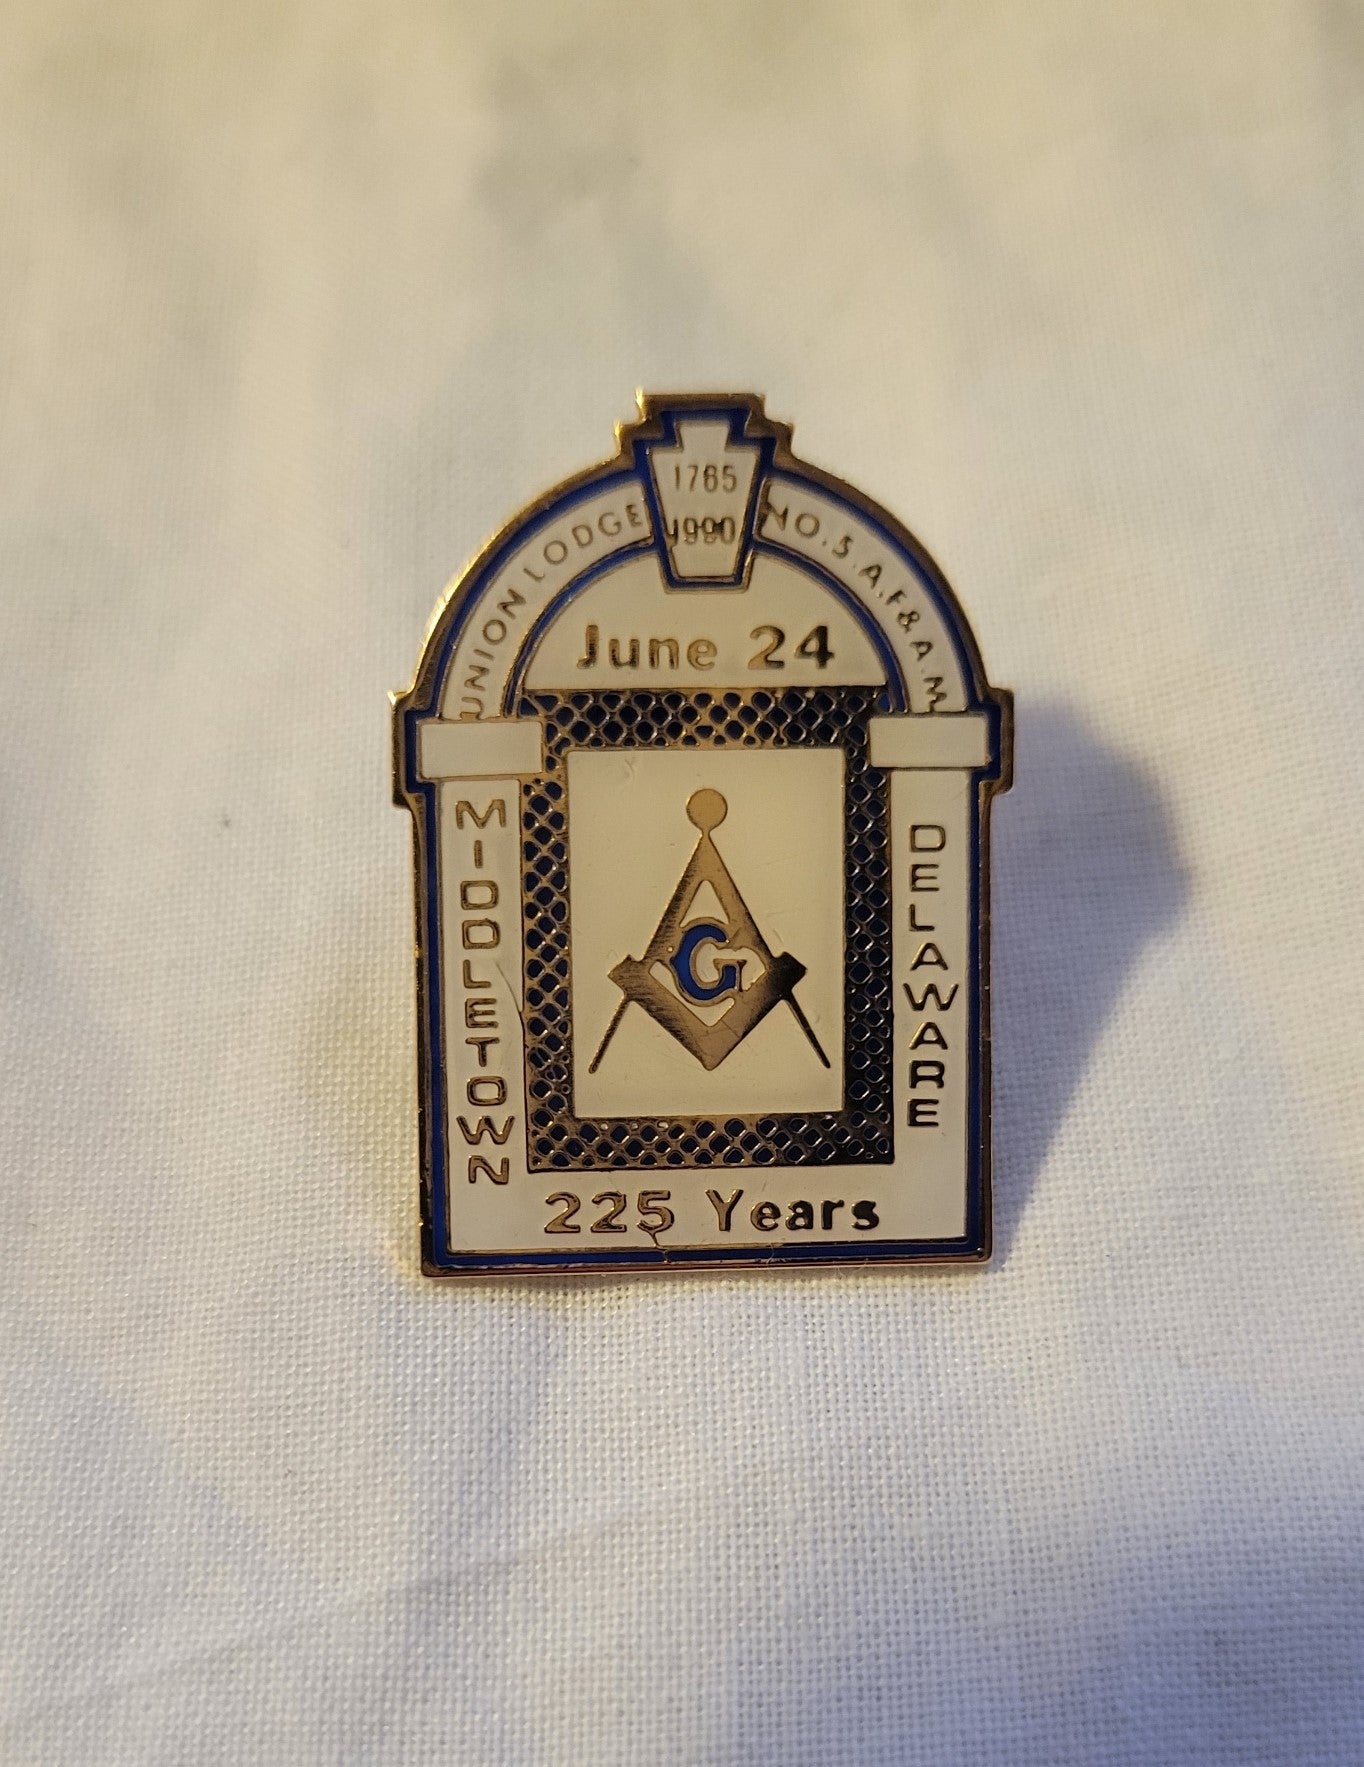 Collectible Masonic pin with Freemason square and compass, from Middletown, Delaware.